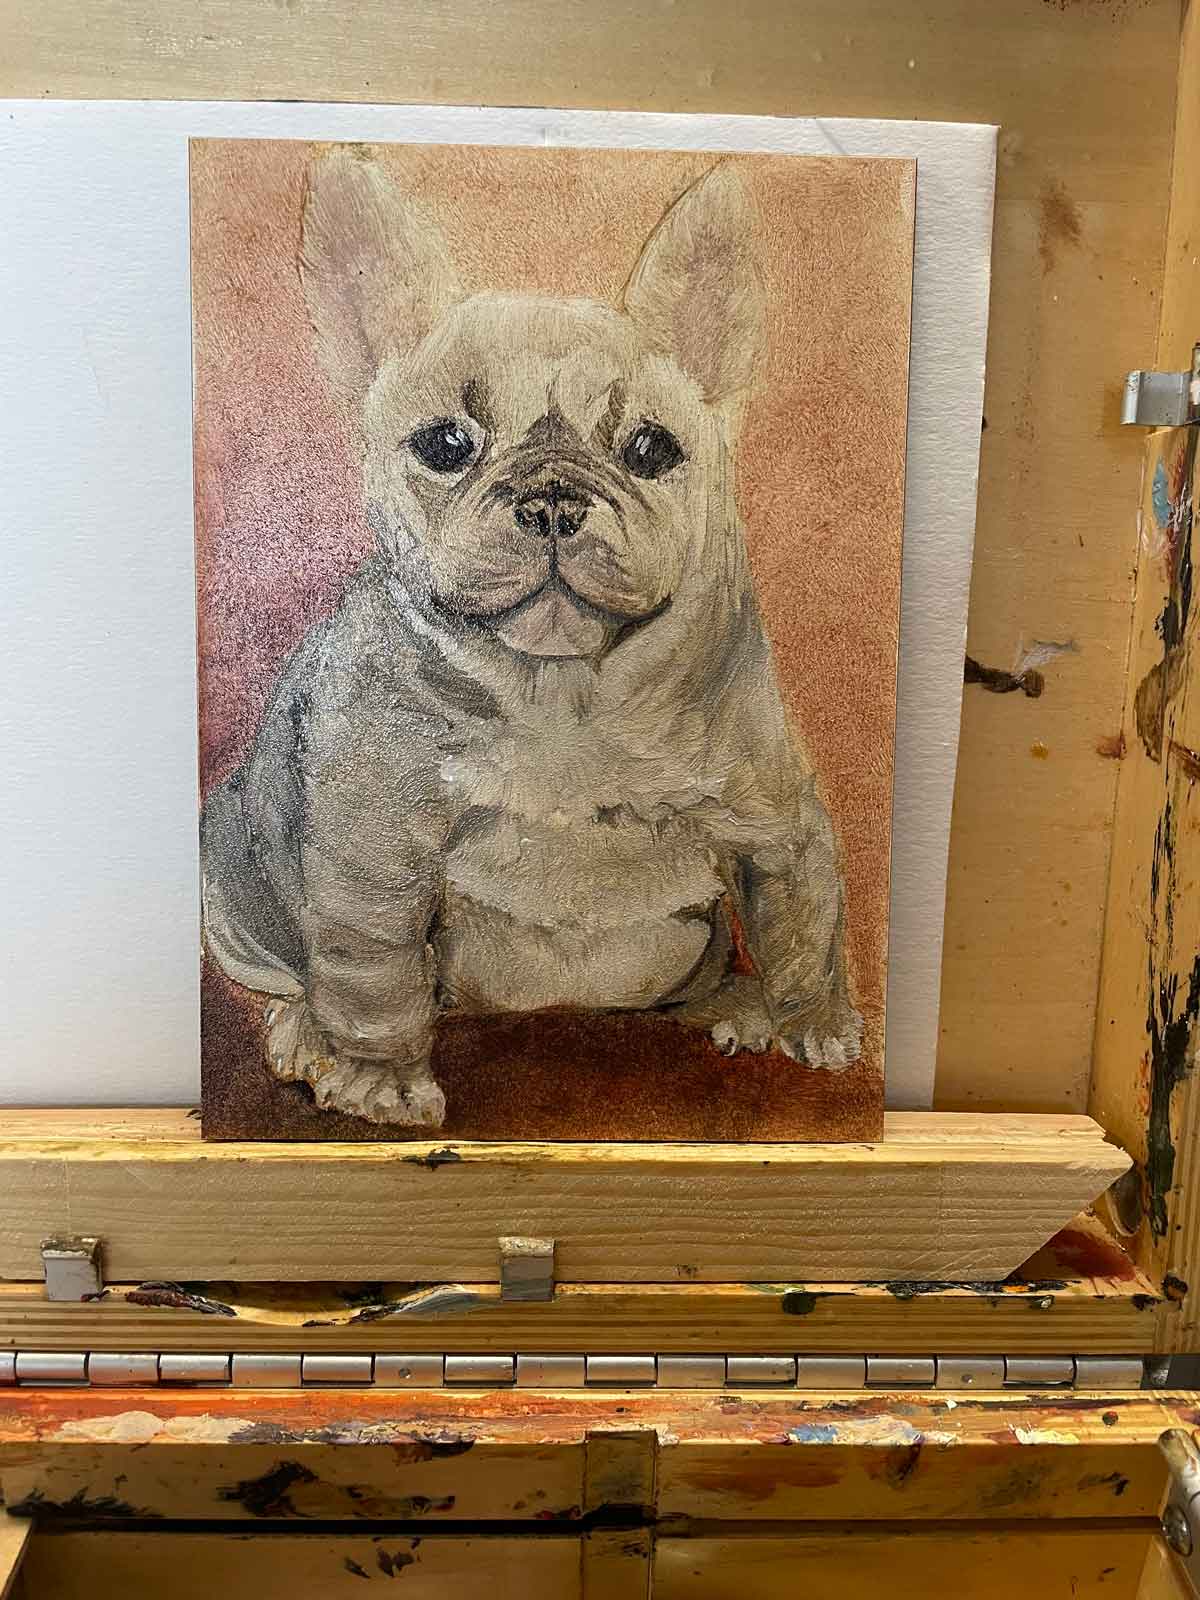 I'm almost done painting a French bulldog pup.